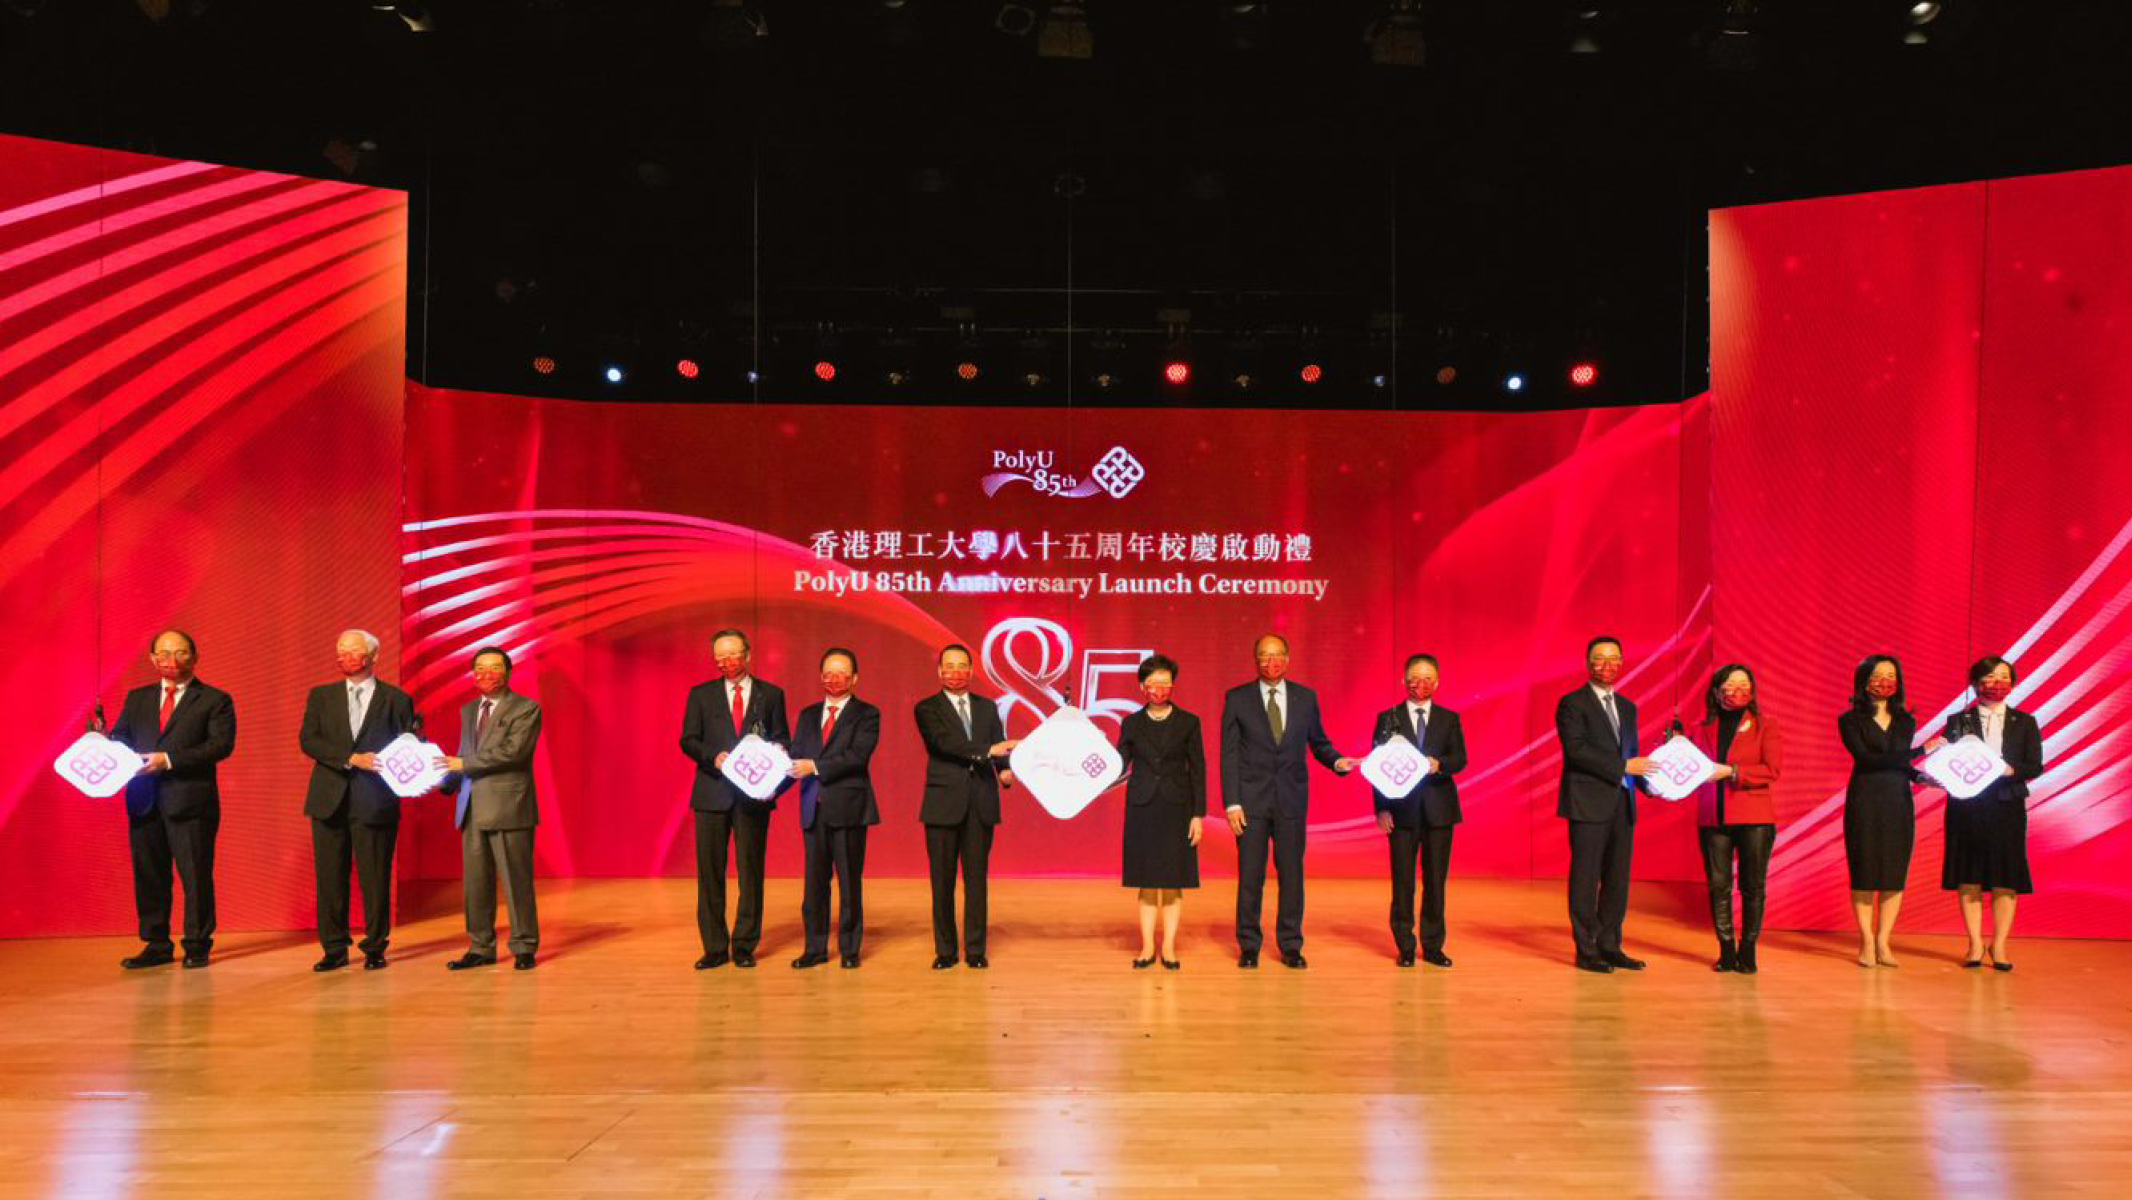 From left: Professor Wing-tak Wong, PolyU Deputy President and Provost; Dr Lawrence Li Kwok-chang, Deputy Chairman of PolyU Council; Mr Carlson Tong, Chairman of UGC; Professor Jin-Guang Teng, PolyU President; Professor Tan Tieniu, Deputy Director of the Liaison Office of the Central People’s Government in the HKSAR; Mr Liu Guangyuan, Commissioner of the Ministry of Foreign Affairs in the HKSAR; Mrs Carrie Lam Cheng Yuet-ngor, Chief Executive of the HKSAR; Dr Lam Tai-fai, PolyU Council Chairman; Professor Jiang Jianxiang, Director-General of the Department of Educational, Scientific and Technological Affairs of the Liaison Office; Mr Kevin Yeung, Secretary for Education; Dr Katherine Ngan,  Chairman of the University Court; Ms Loretta Fong, Treasurer of the University; and Dr Miranda Lou, PolyU Executive Vice President.